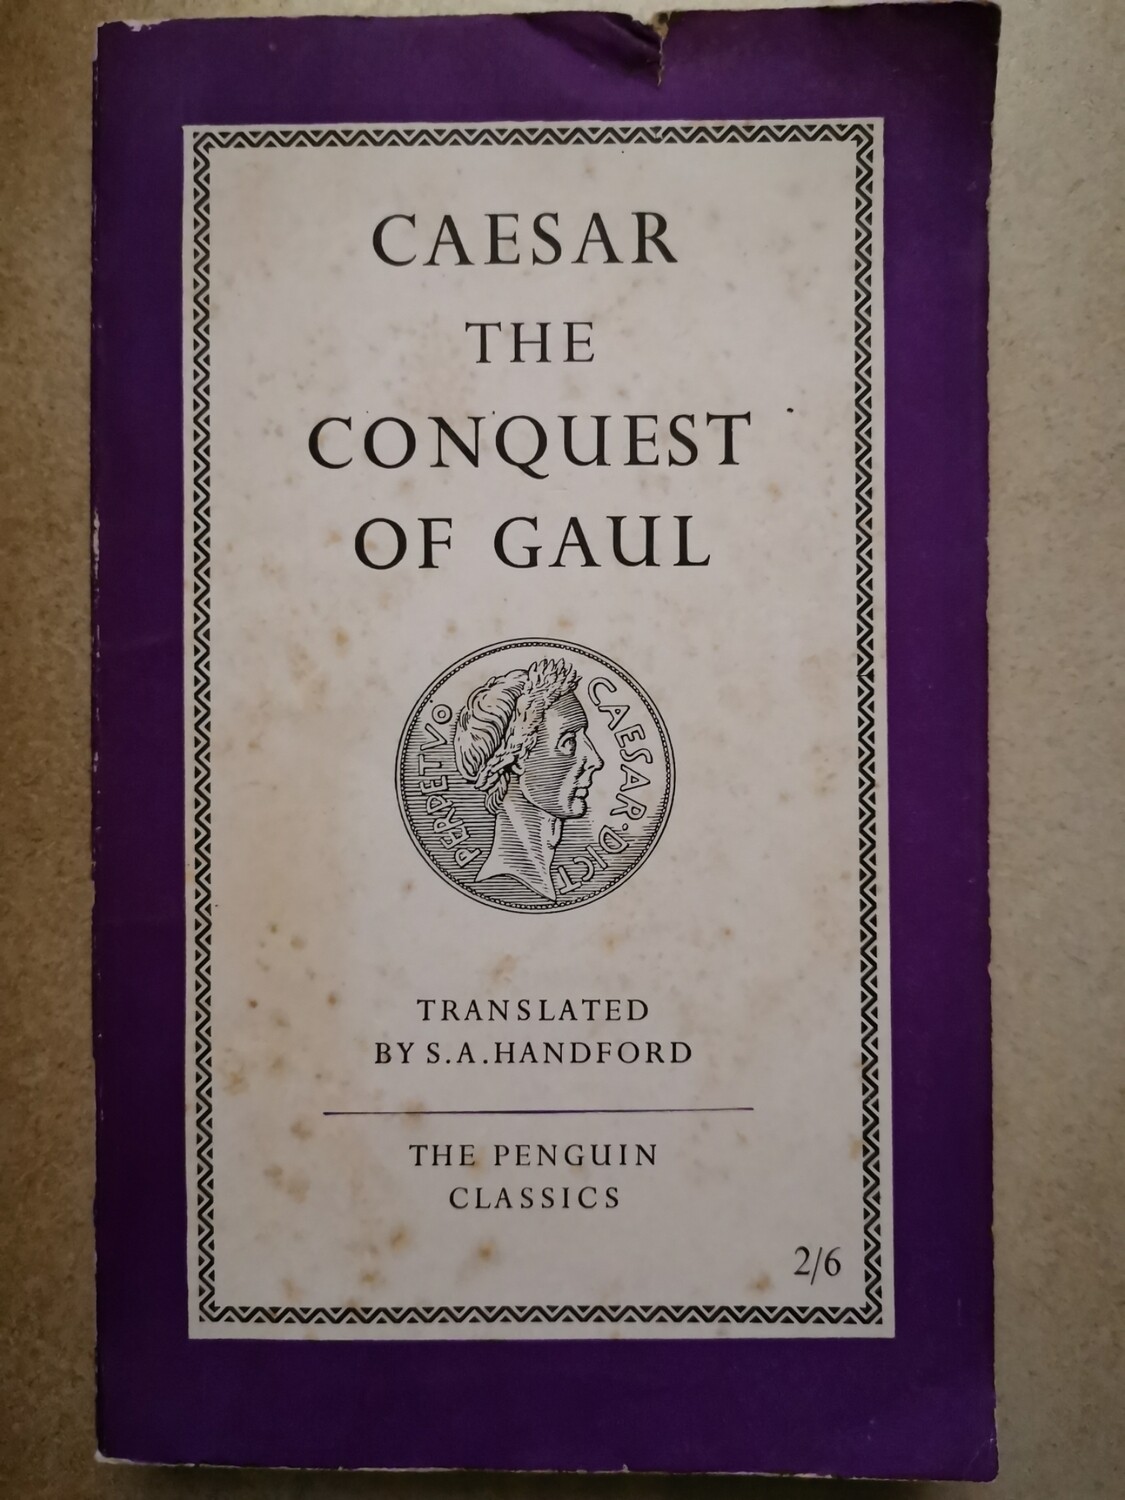 Caesar The conquest of Gaul, Translated by S. A. Handford